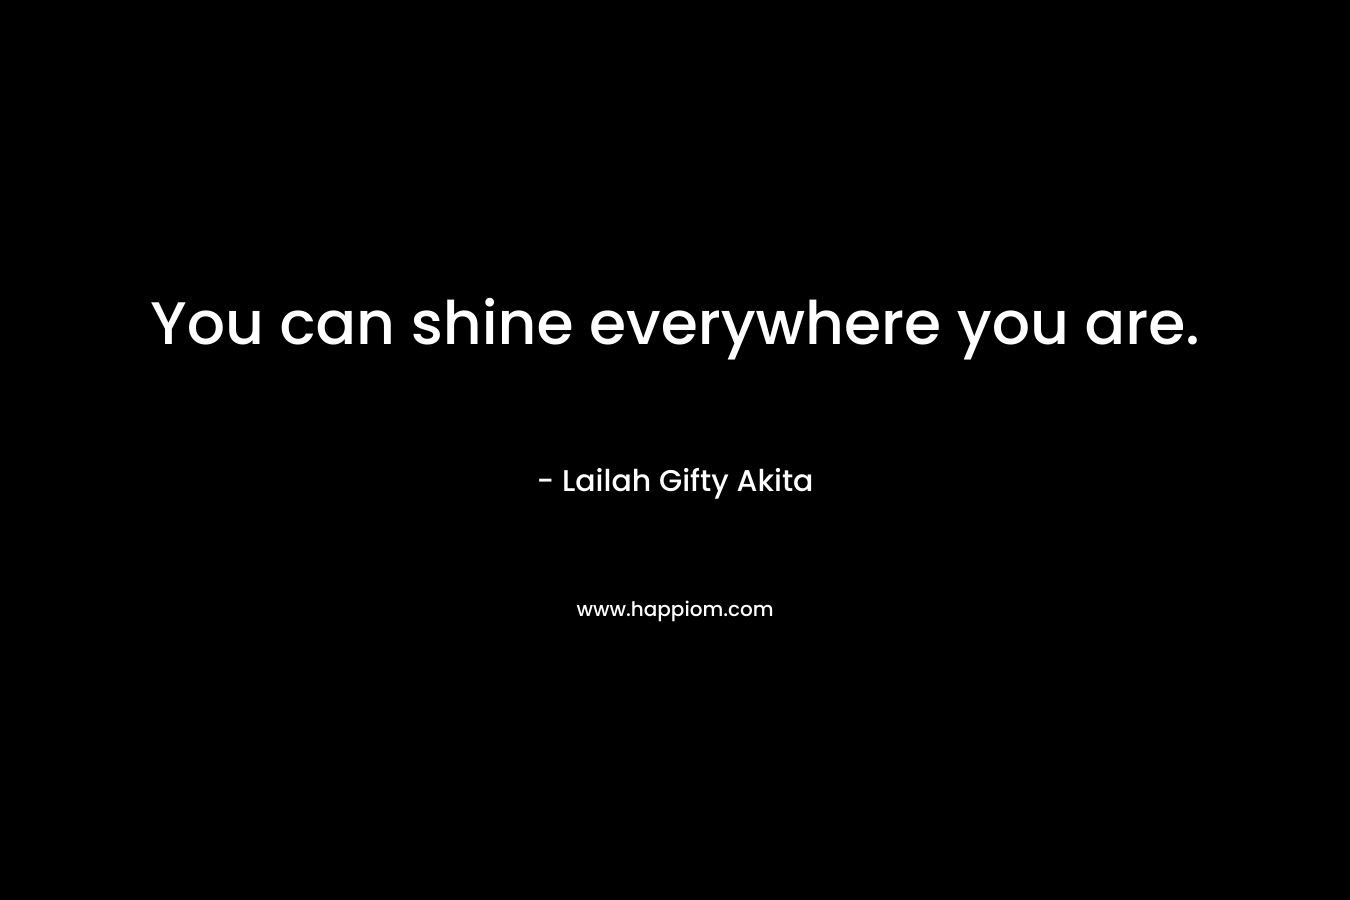 You can shine everywhere you are.